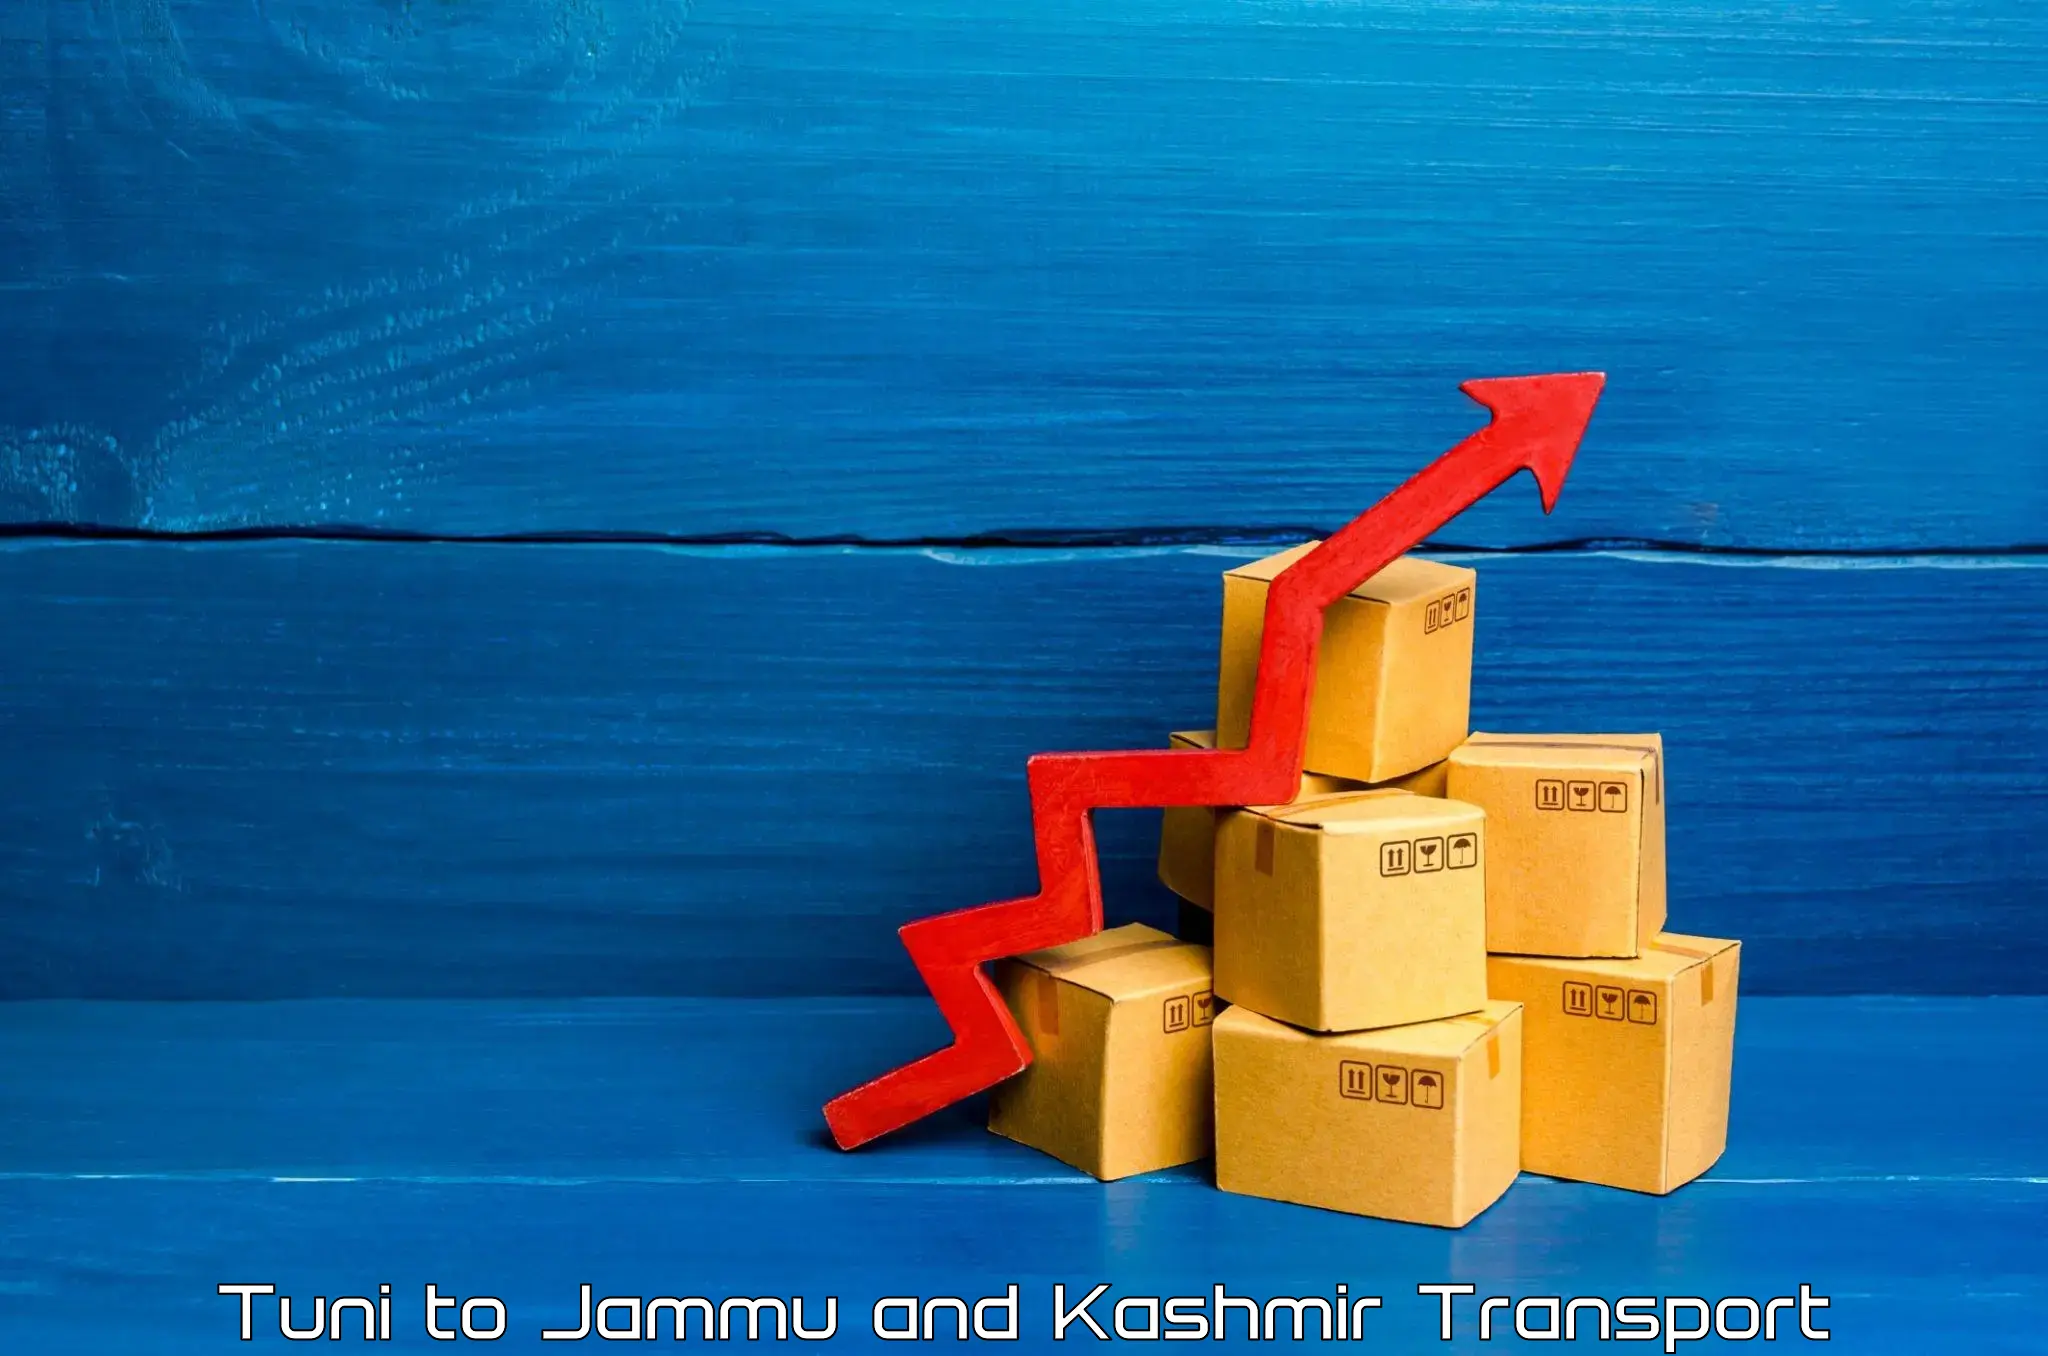 Express transport services Tuni to Udhampur